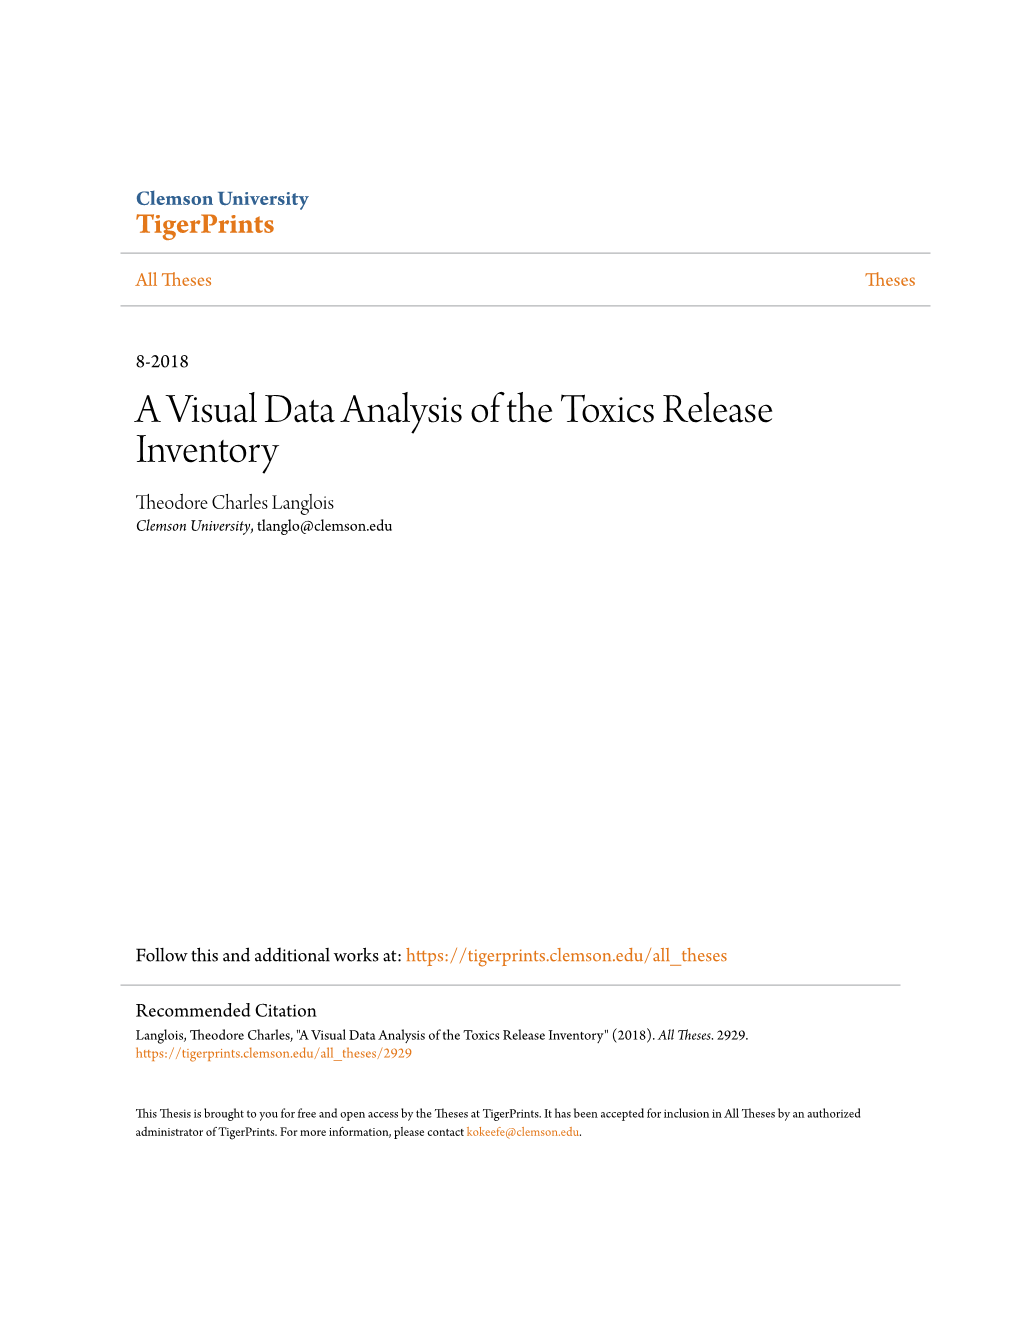 A Visual Data Analysis of the Toxics Release Inventory Theodore Charles Langlois Clemson University, Tlanglo@Clemson.Edu